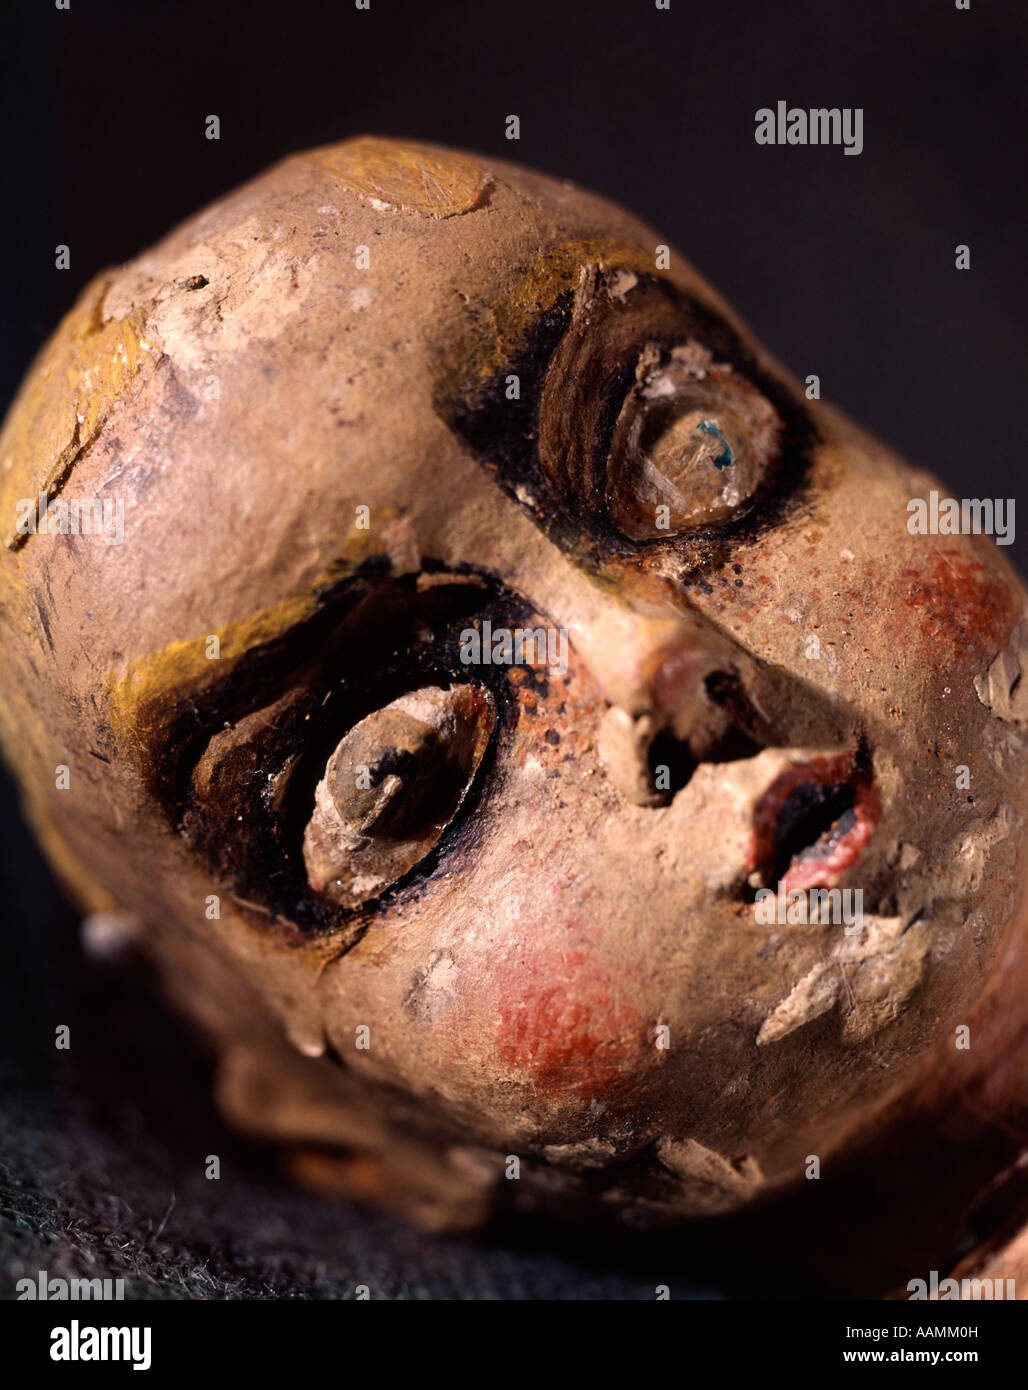 1950s 1960s 1970s DAMAGED DOLL HEAD BURRIED IN DIRT DEATH AND HORROR Stock Photo